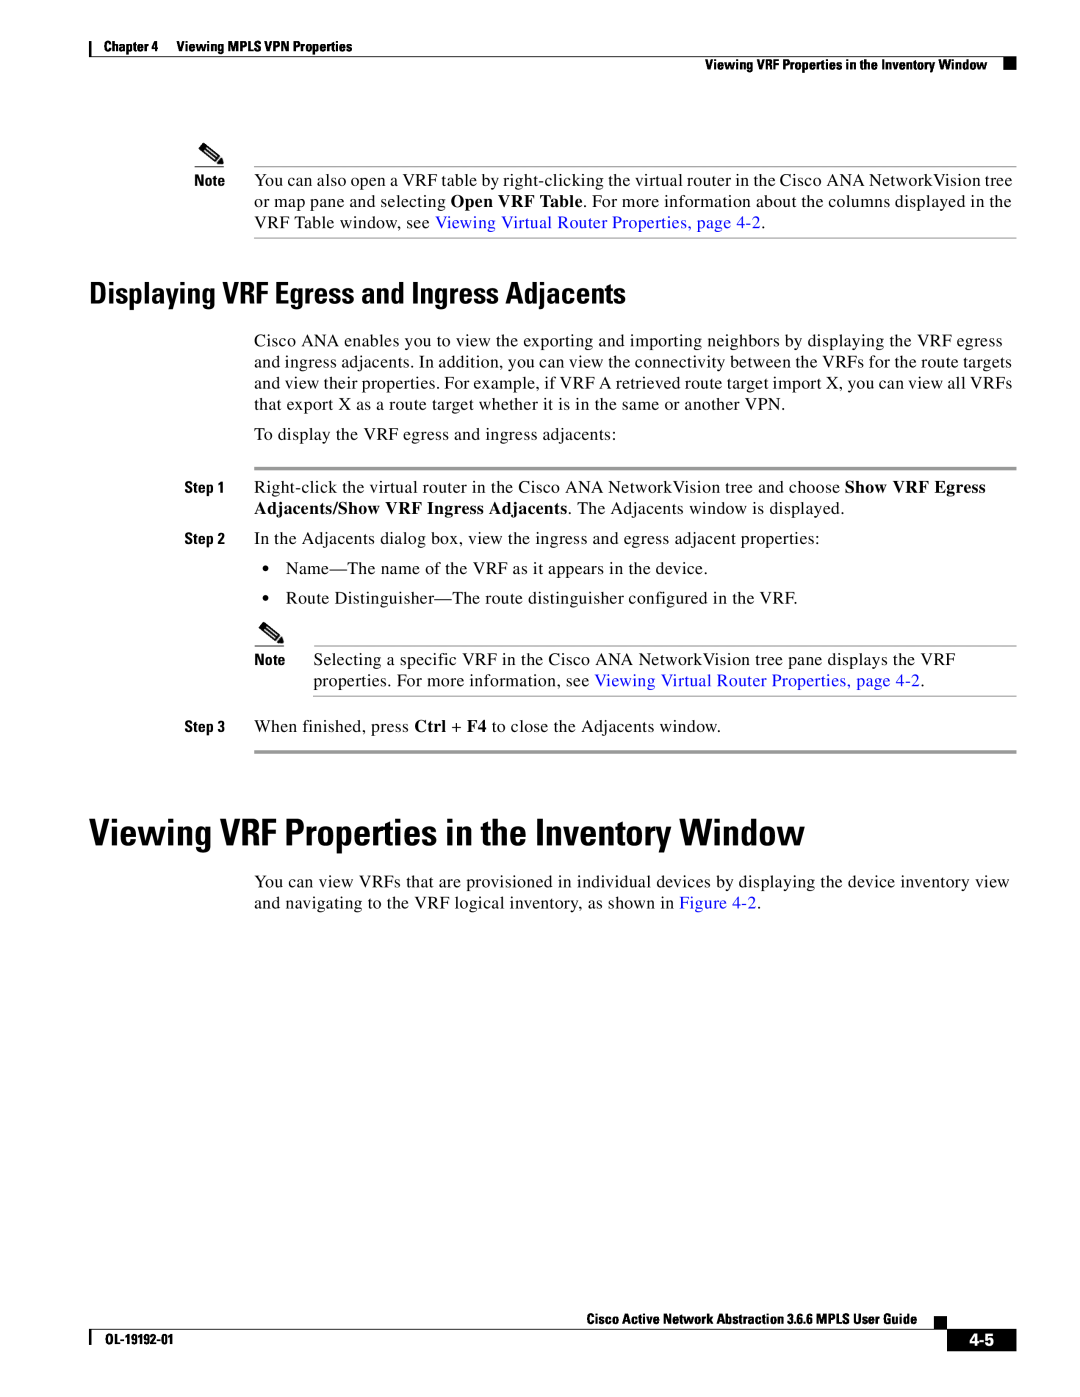 Cisco Systems 3.6.6 manual Viewing VRF Properties in the Inventory Window, Displaying VRF Egress and Ingress Adjacents 